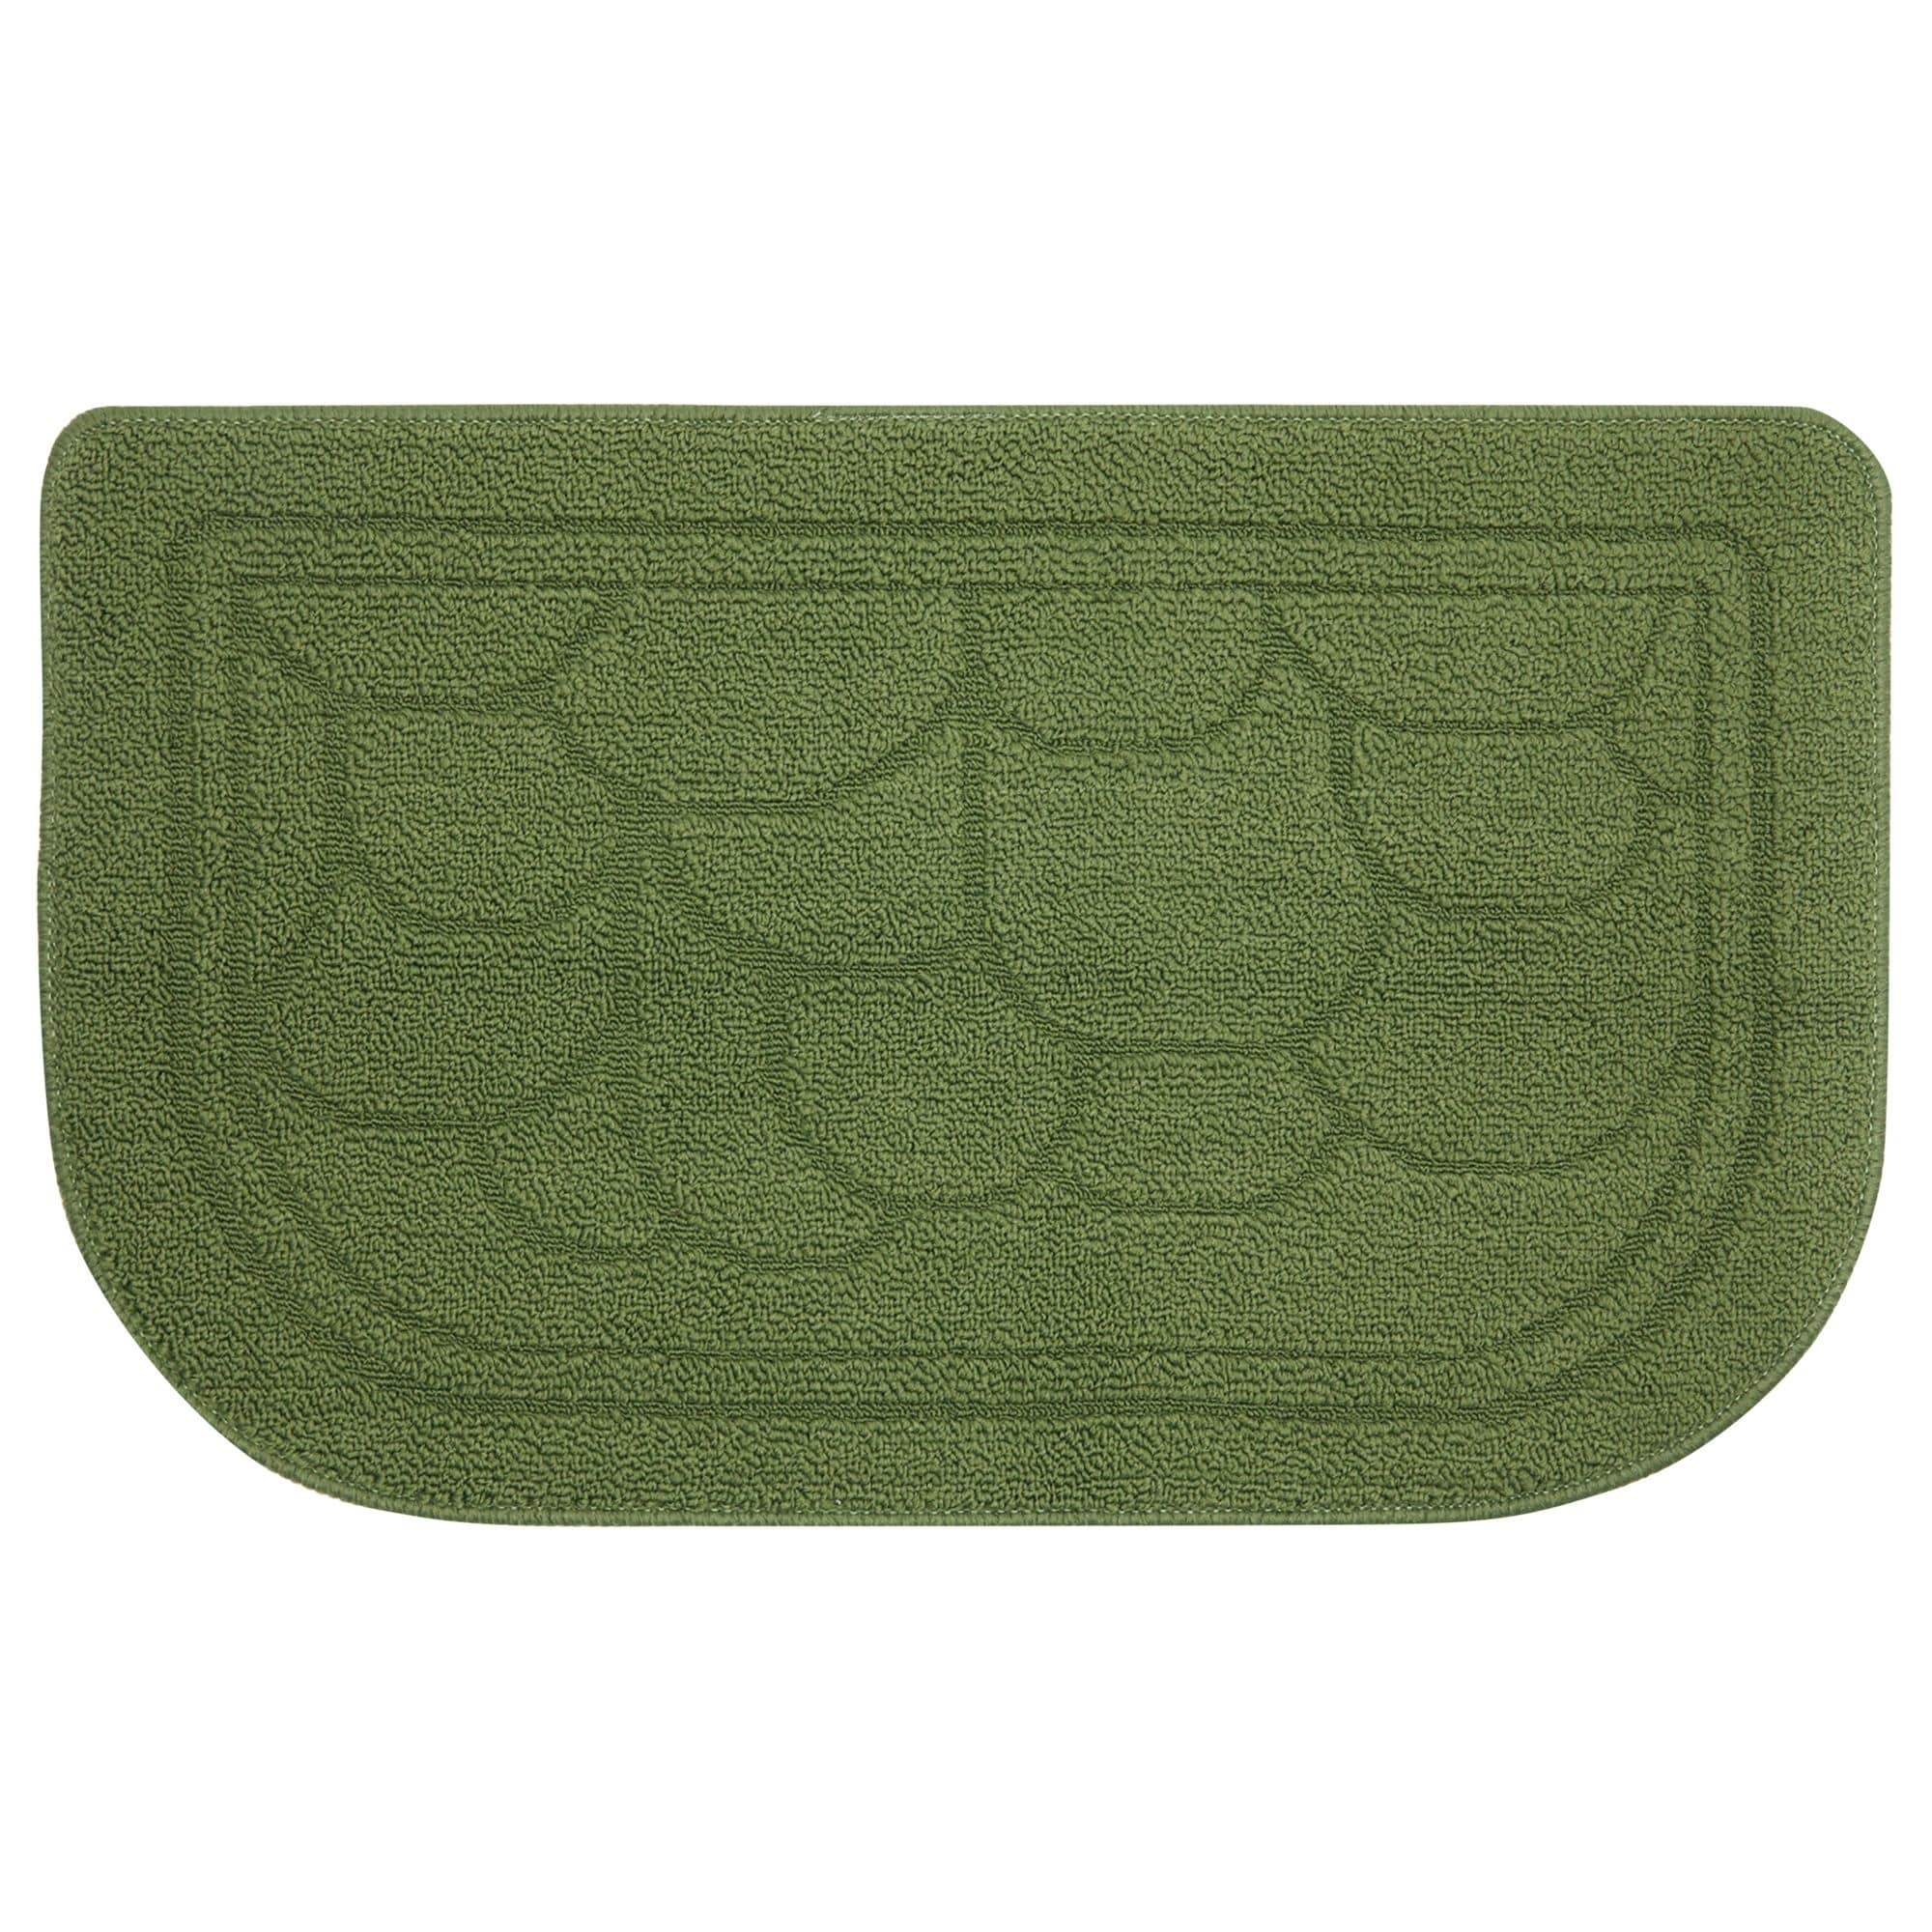 https://ak1.ostkcdn.com/images/products/is/images/direct/523e30bb0ec2cc7a8000b6f4b1c5c134d089460e/Half-Circle-Door-Mat-for-Indoors-and-Outdoors-%28Green%2C-30-x-18-Inches%29.jpg